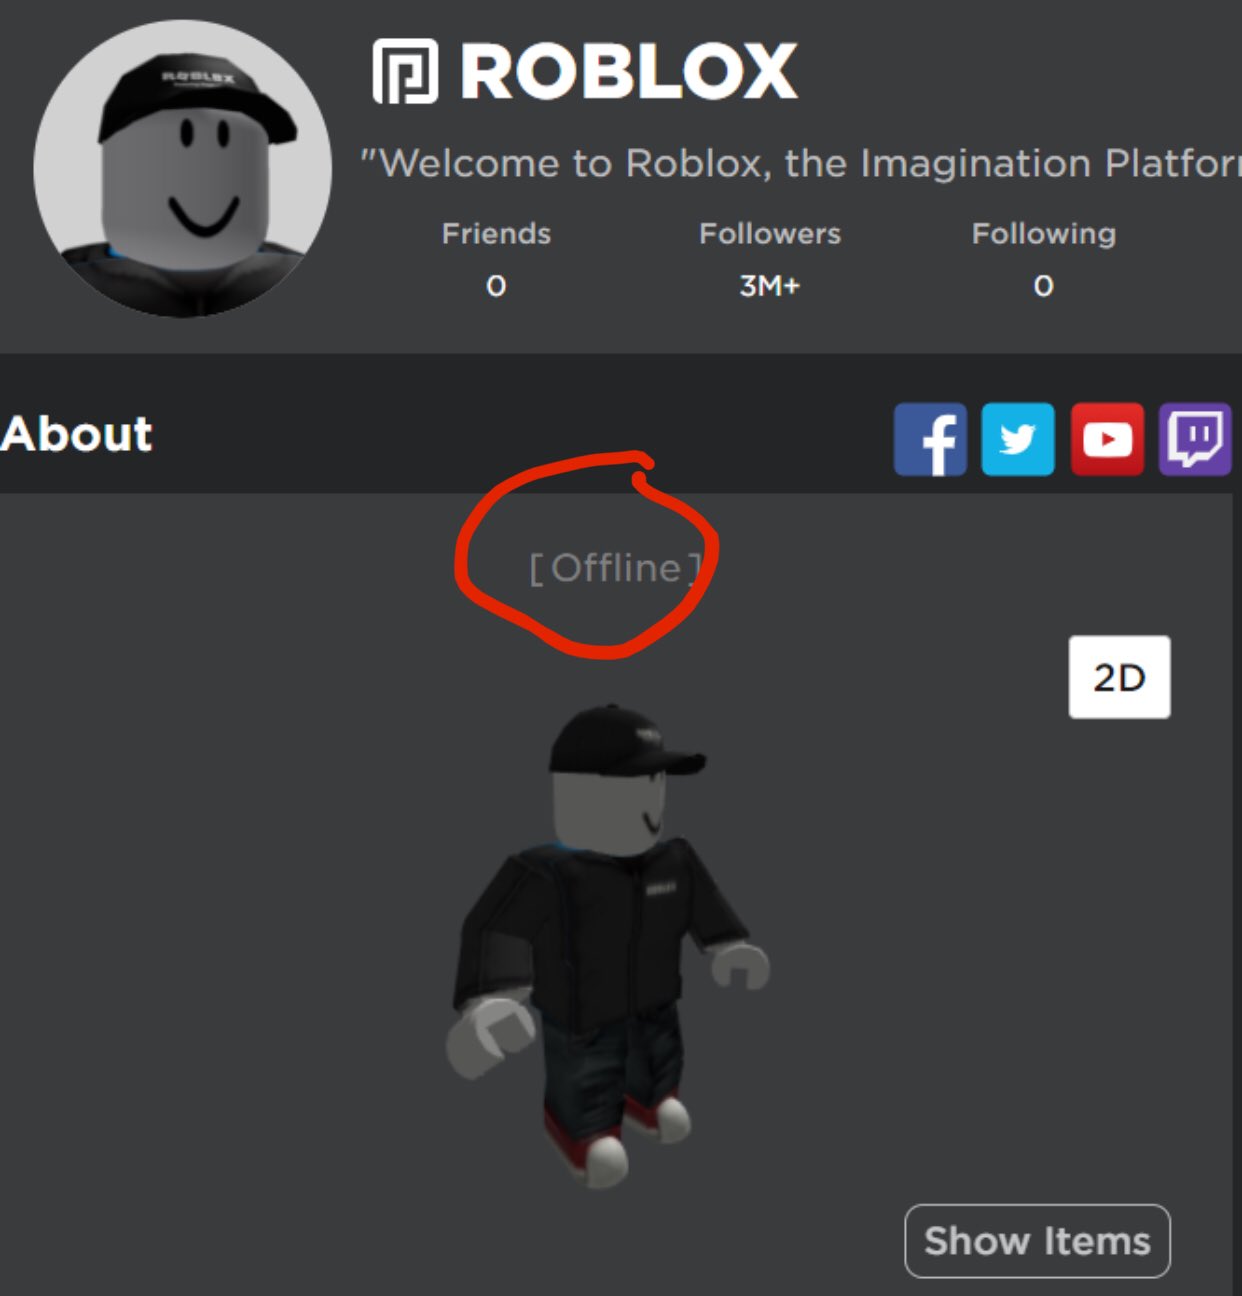 News Roblox On Twitter But Roblox Is Offline Look - how to get on roblox when its offline